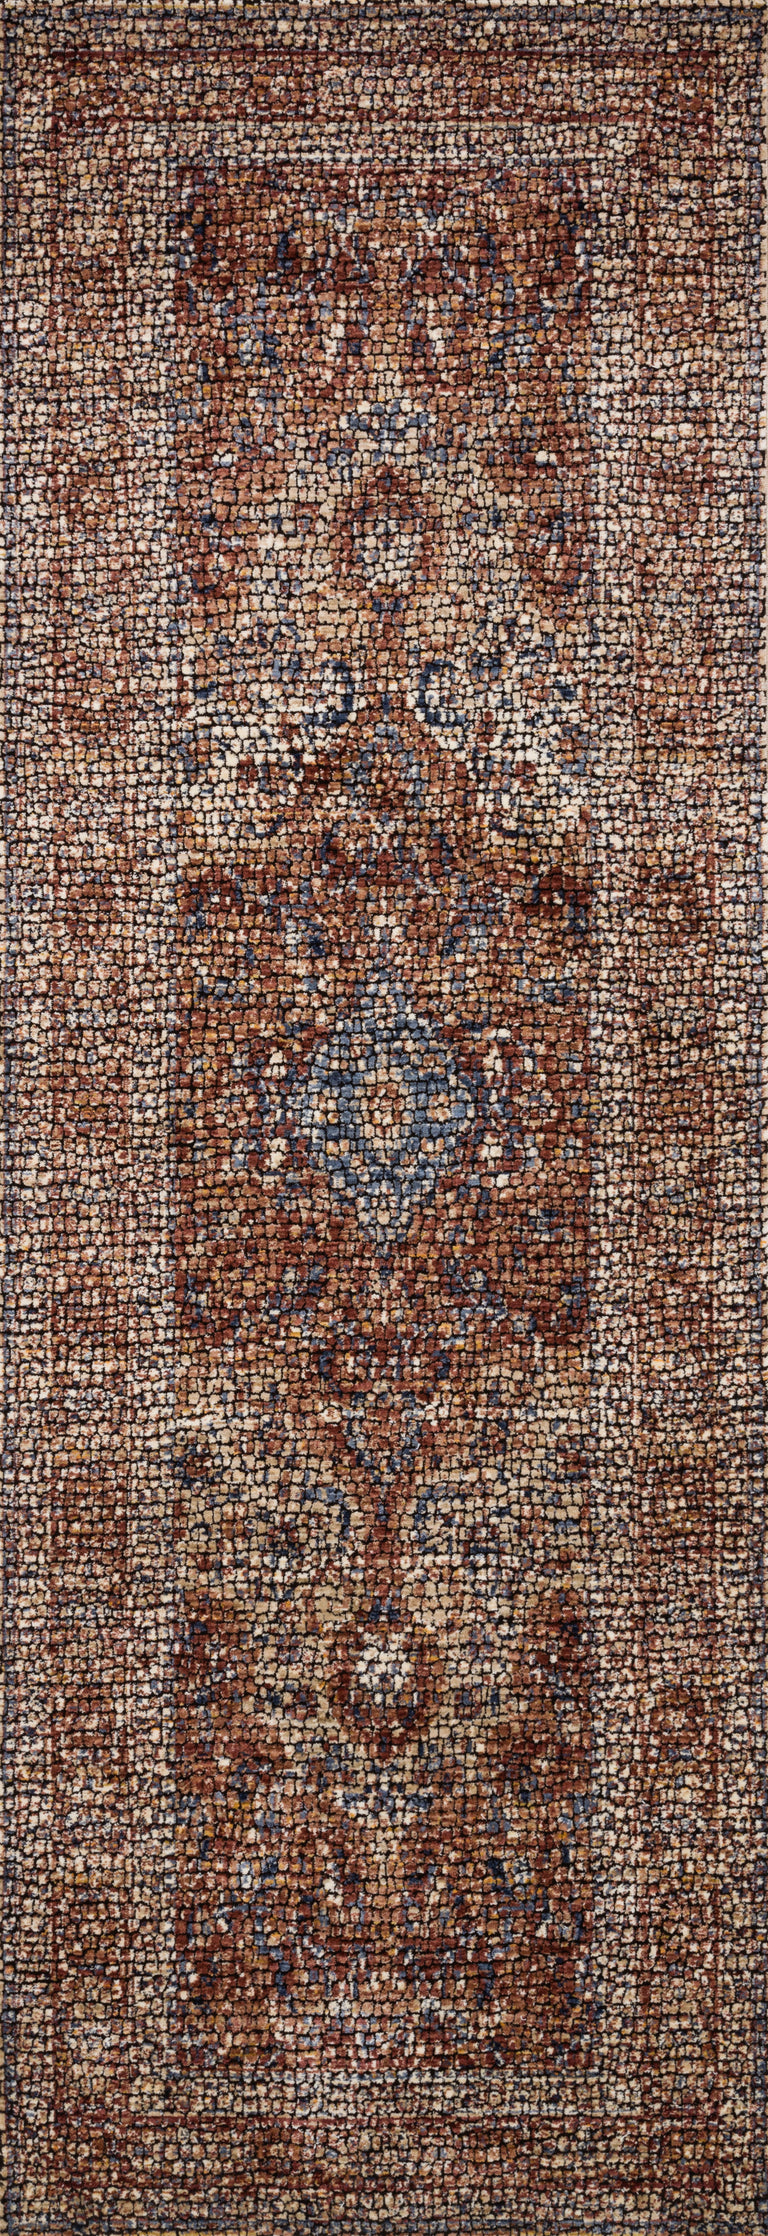 Loloi Rugs Porcia Collection Rug in Adobe Spice, Adobe Spice - 7'10" x 7'10"